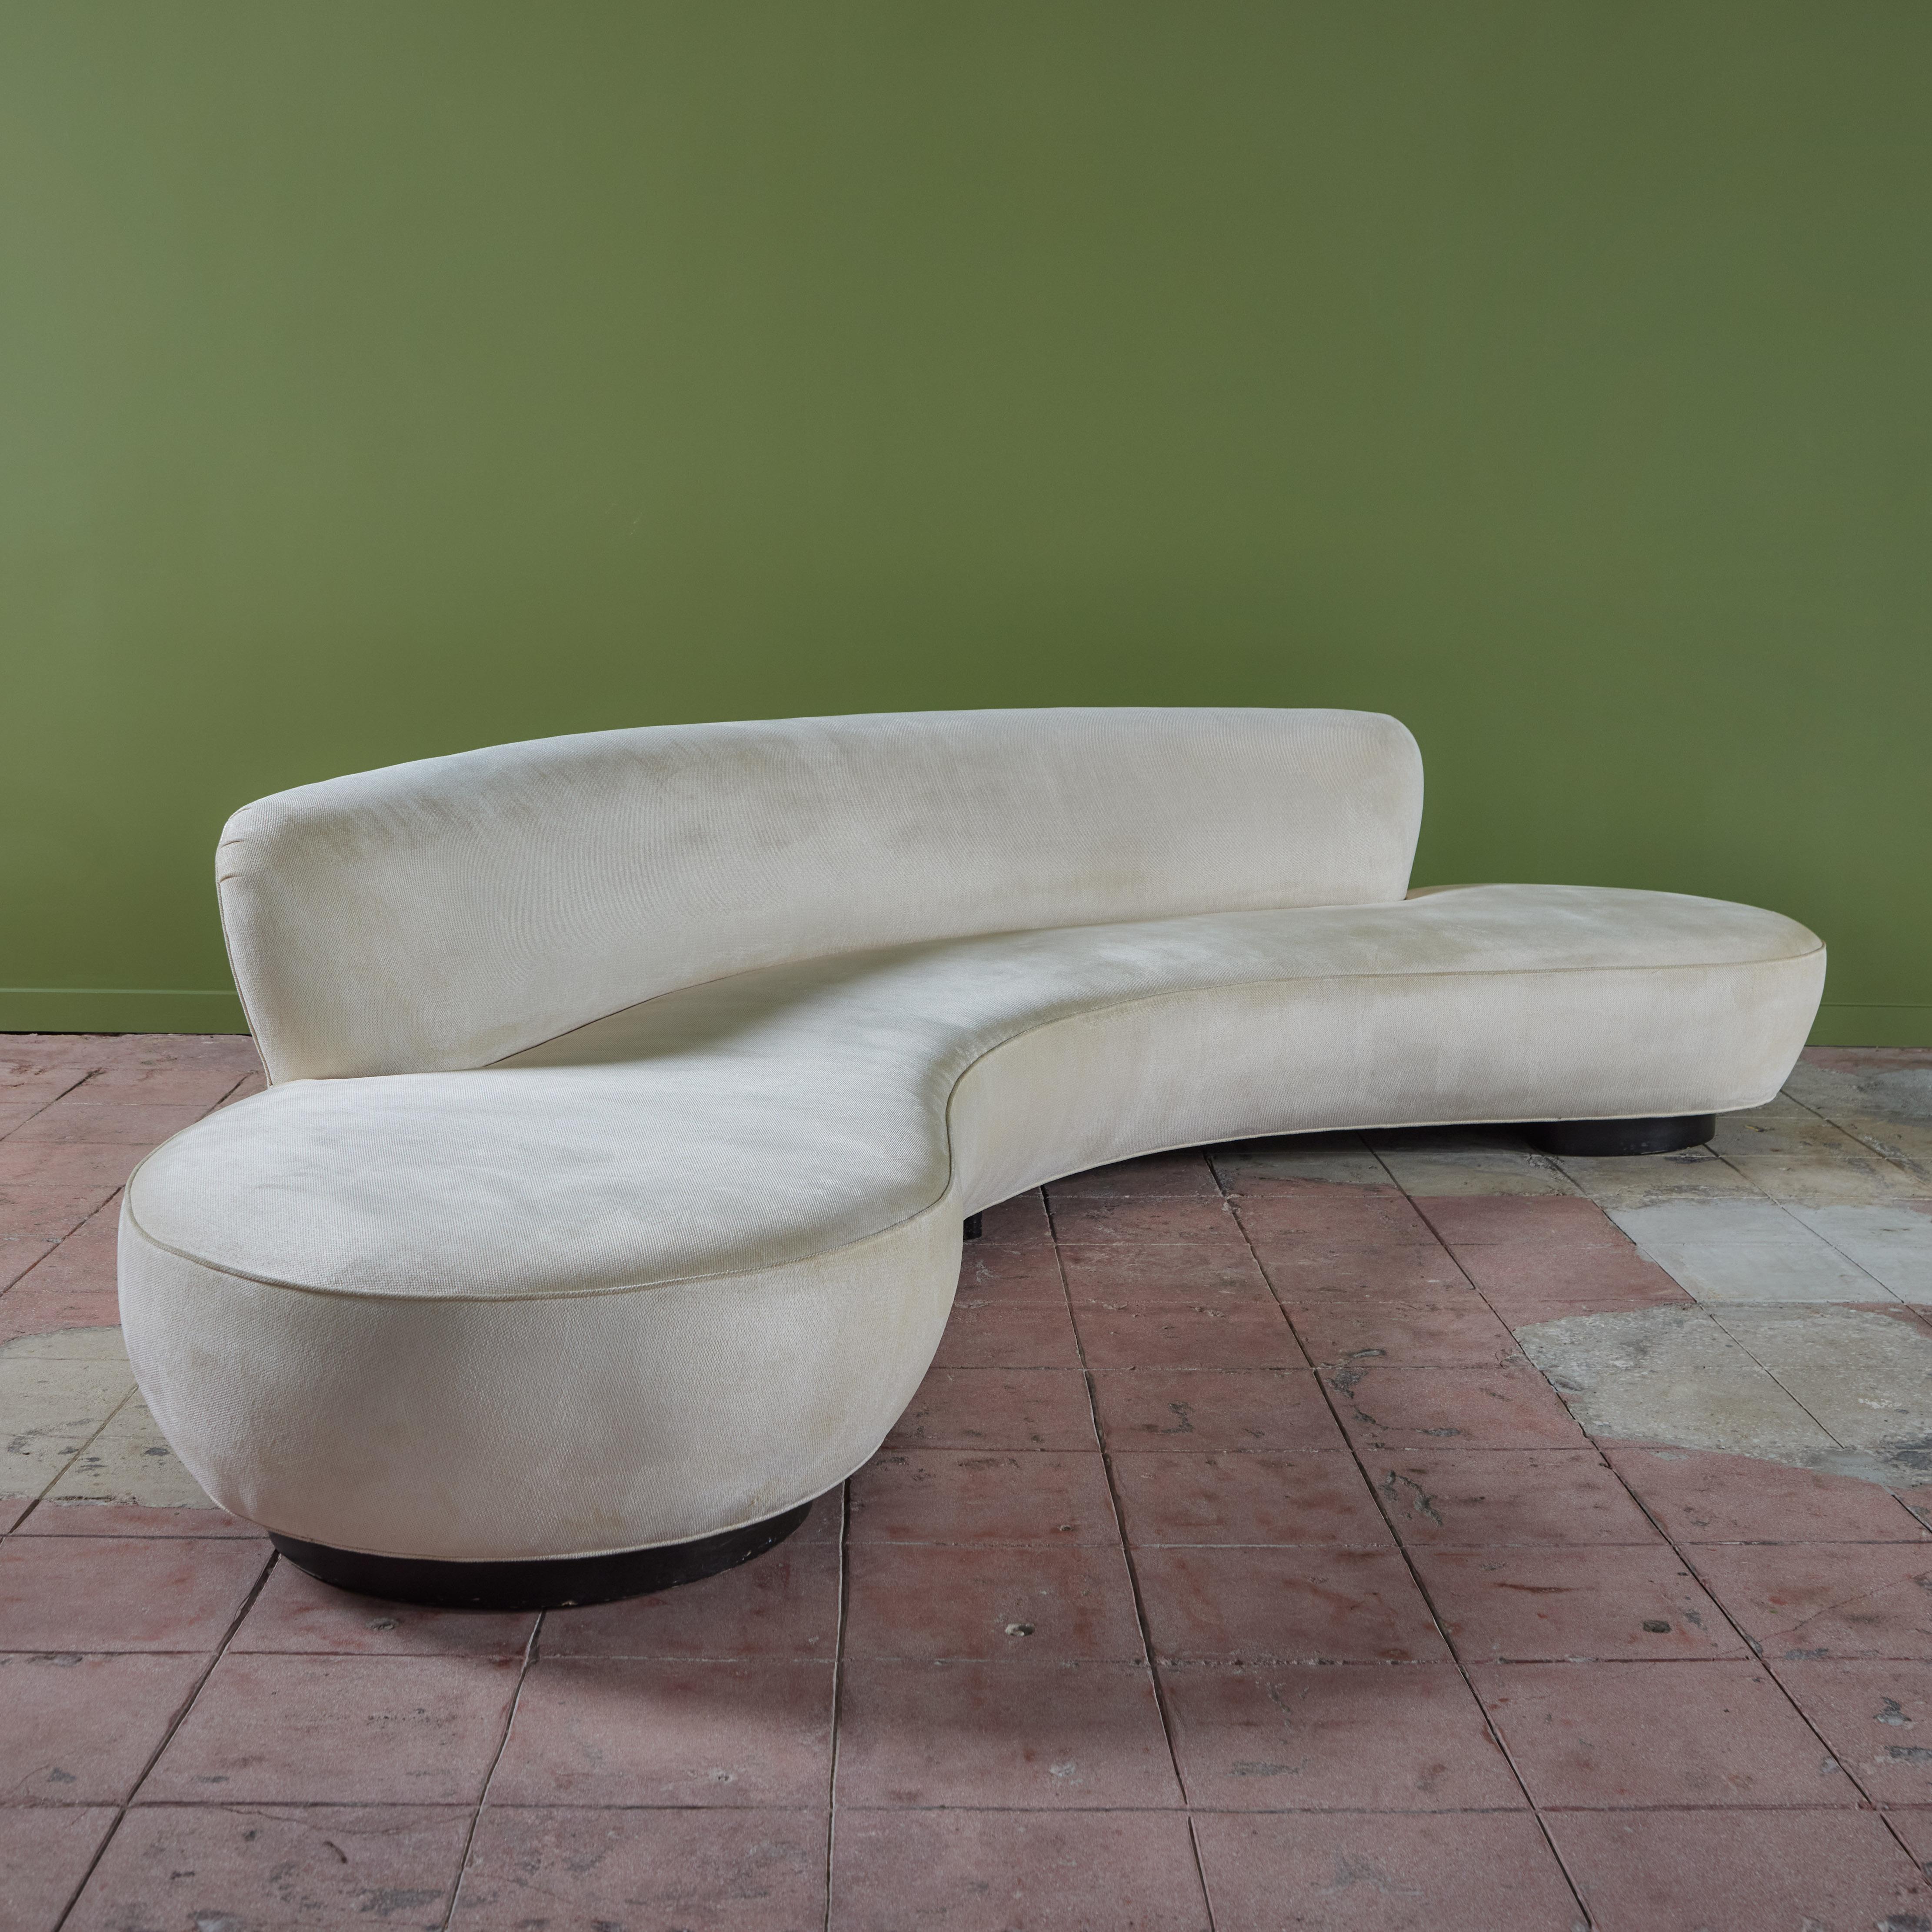 Curved 'model 150BS' sofa by Vladimir Kagan, c.2000s, USA. Vladimir Kagan (1927-2016) originally designed this sofa in the 1950s, this piece is from a later production. The sofa features the original cream linen velvet upholstery with walnut base.